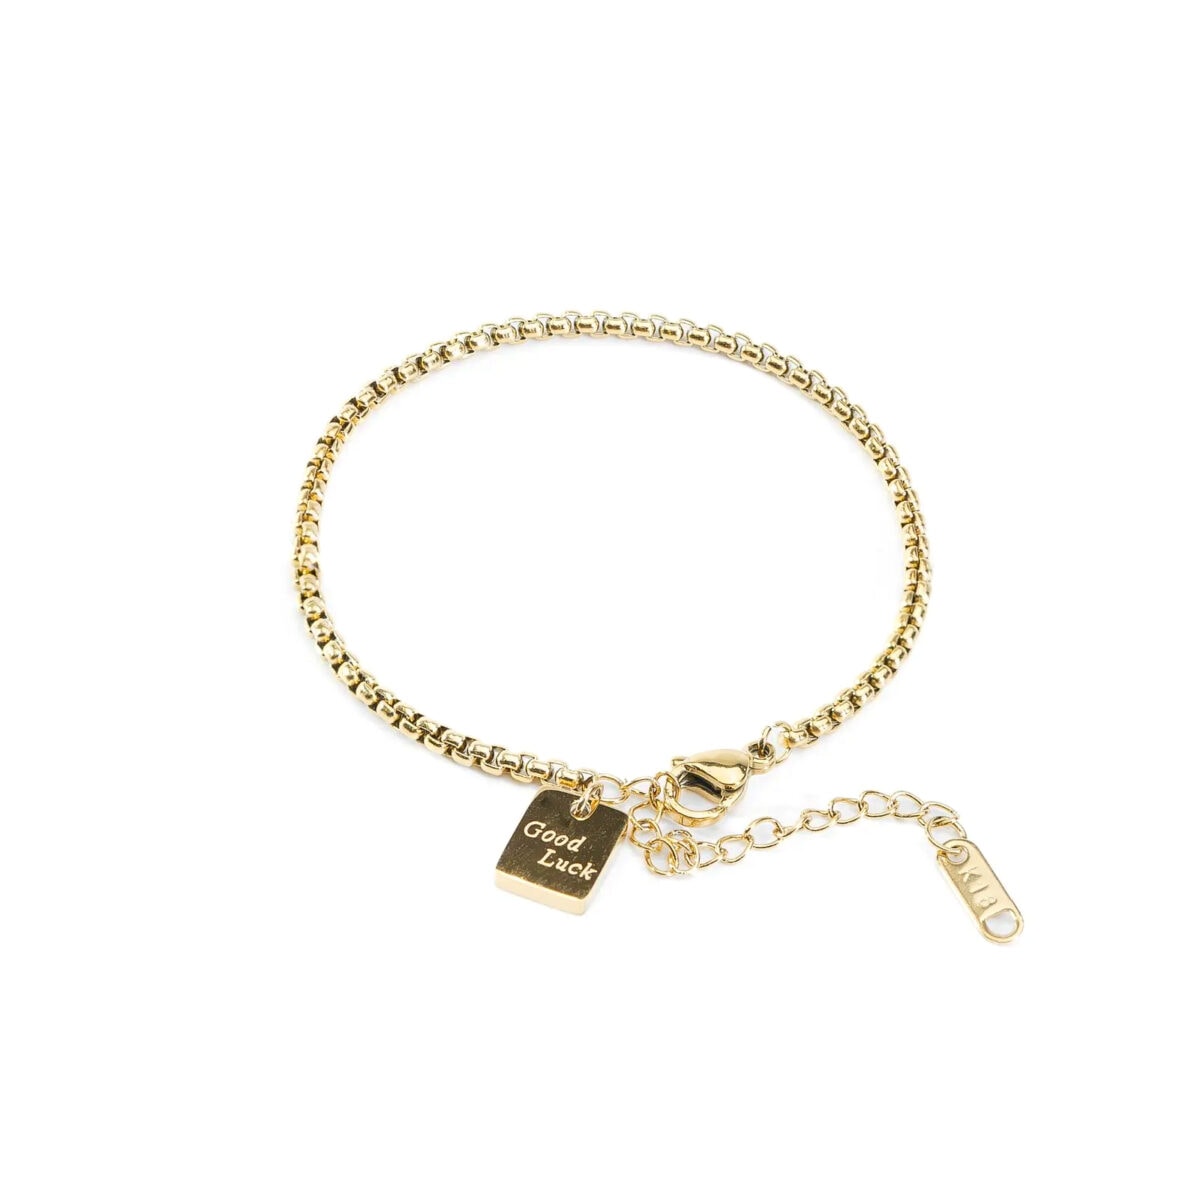 https://m.clubbella.co/product/good-luck-charm-bracelet/ Good Luck Charm Bracelet (2)